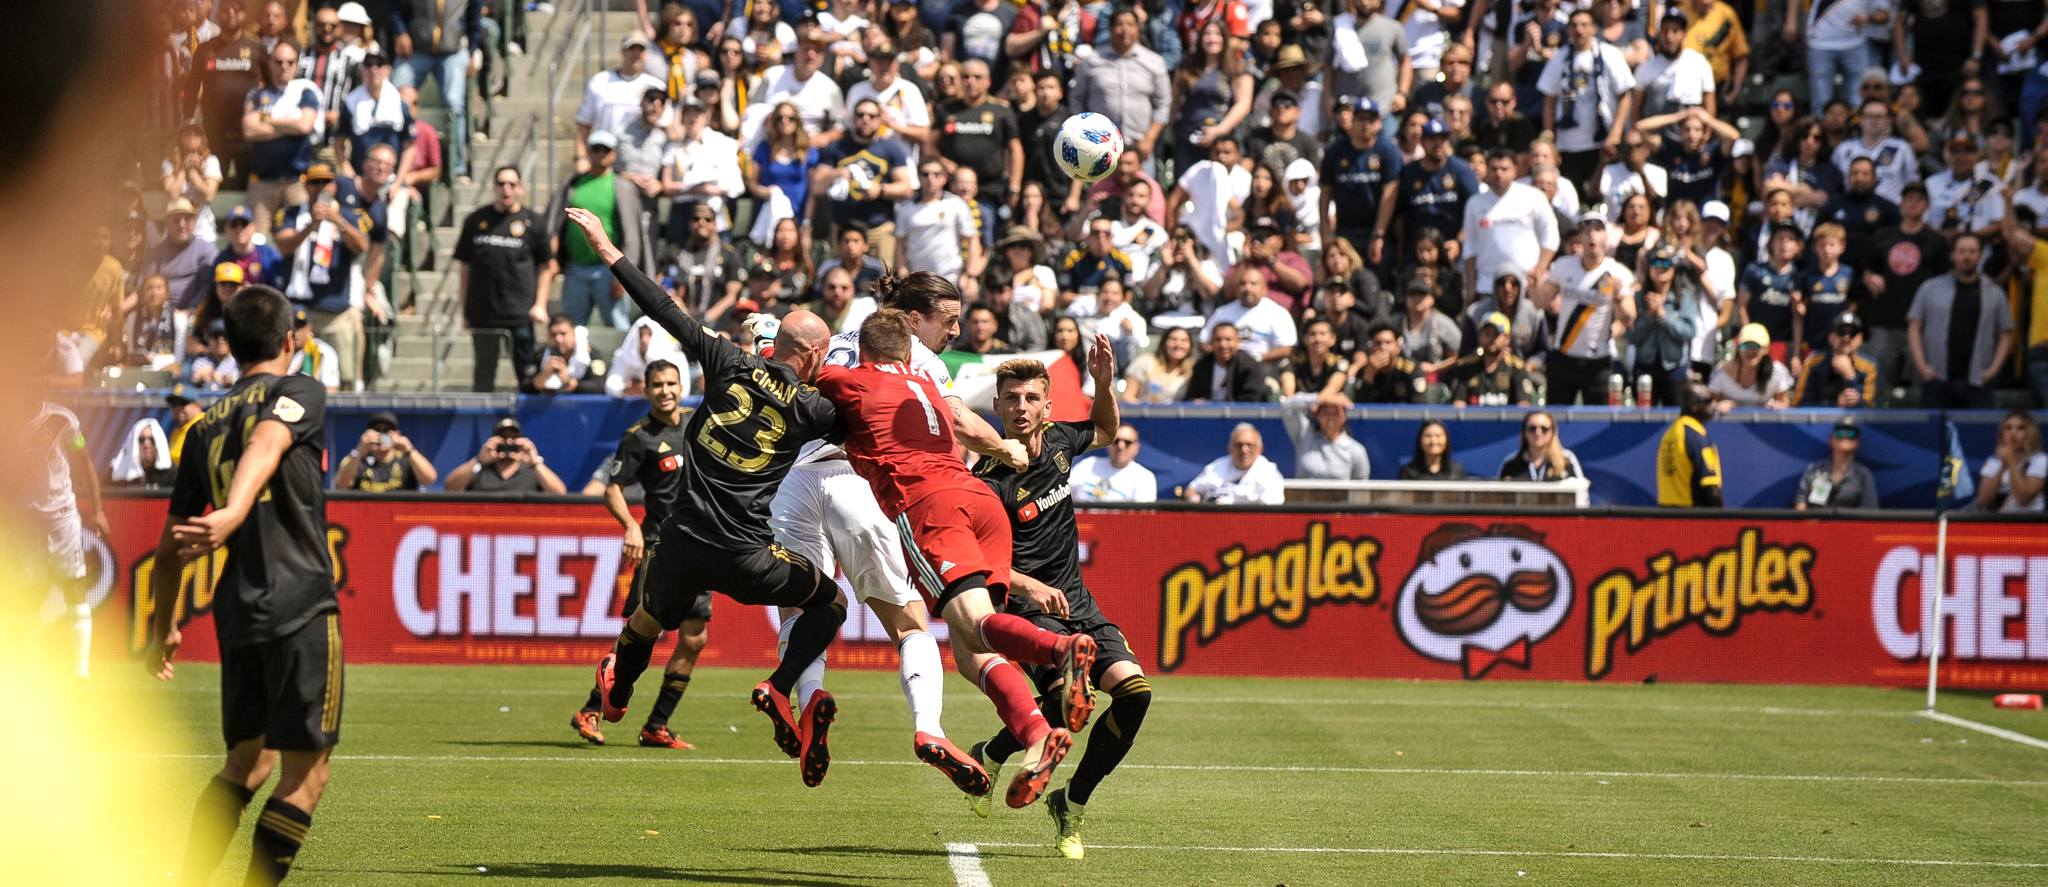 Zlatan Ibrahimovic scores for the LA Galaxy against LAFC on March 31, 2018 - Photo by Steve Carrillo